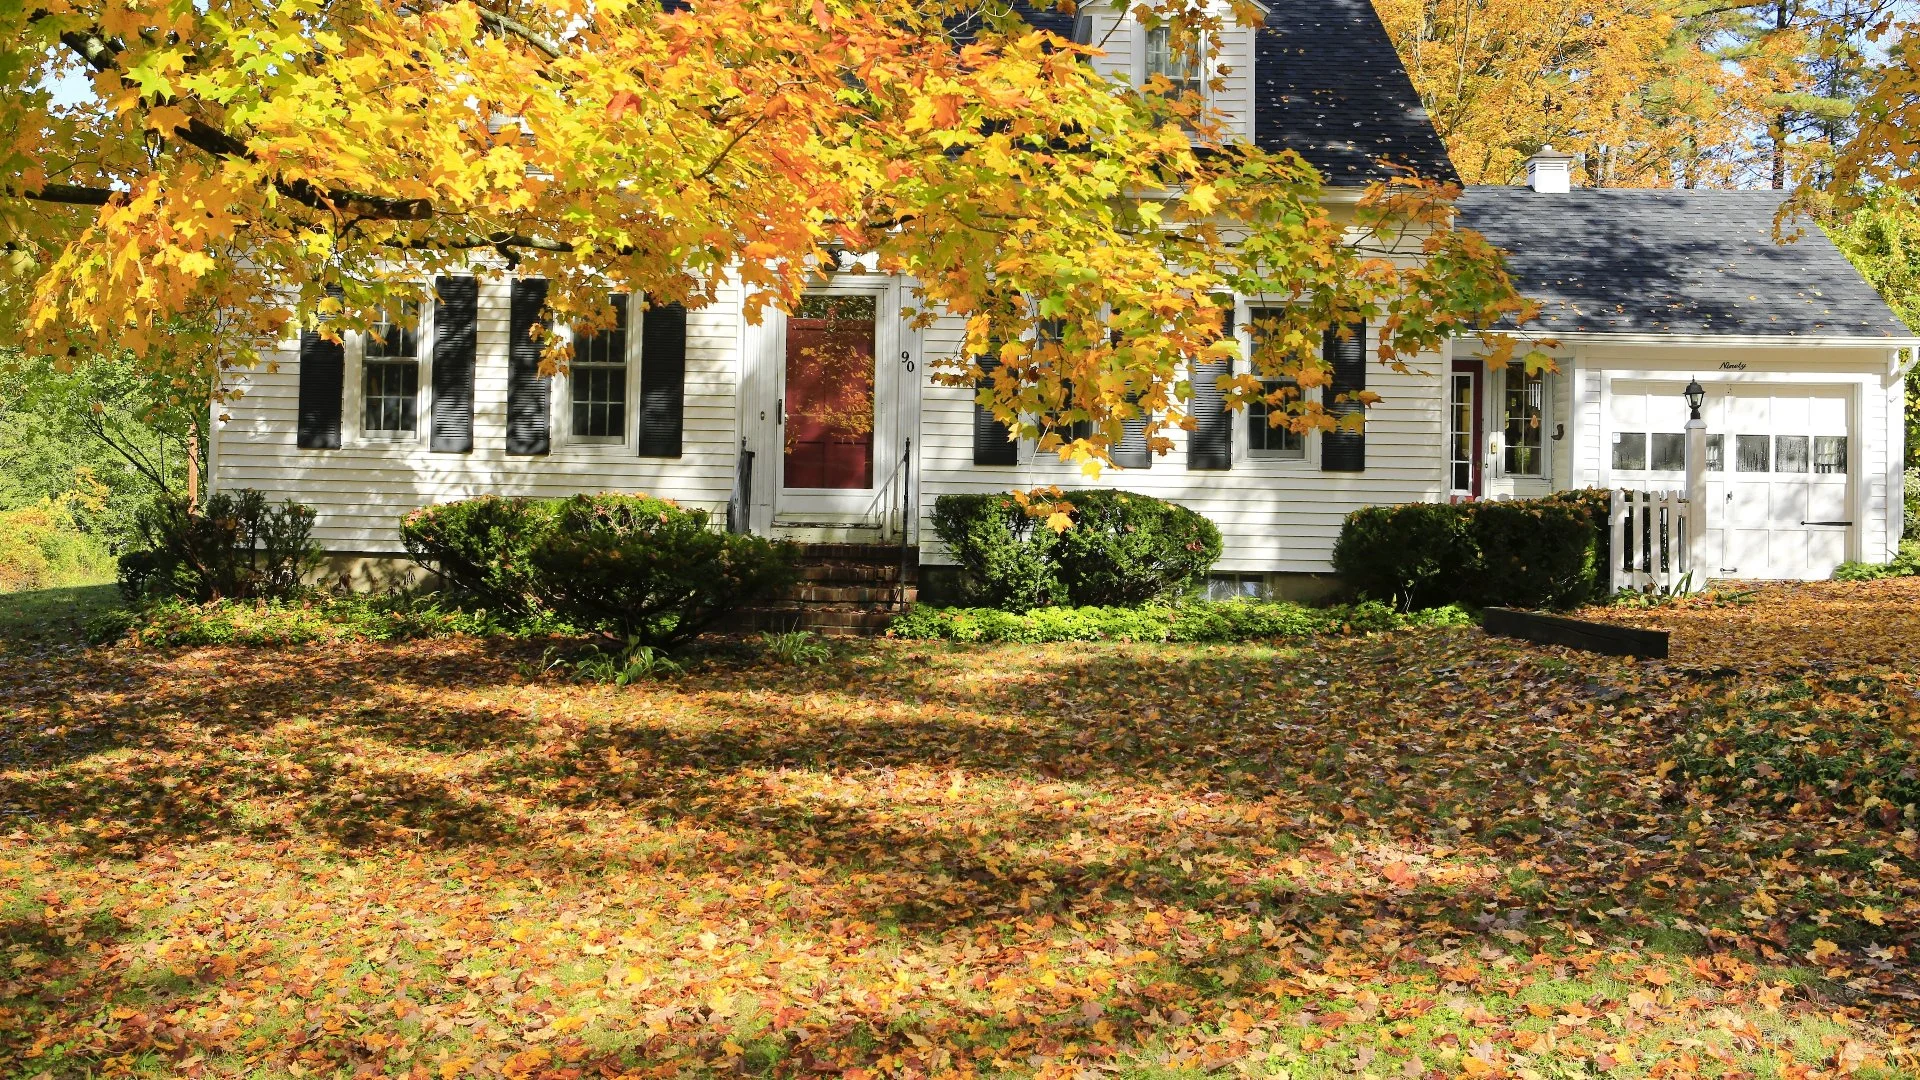 What Is the Best Way to Get Rid of the Leaves on My Lawn?